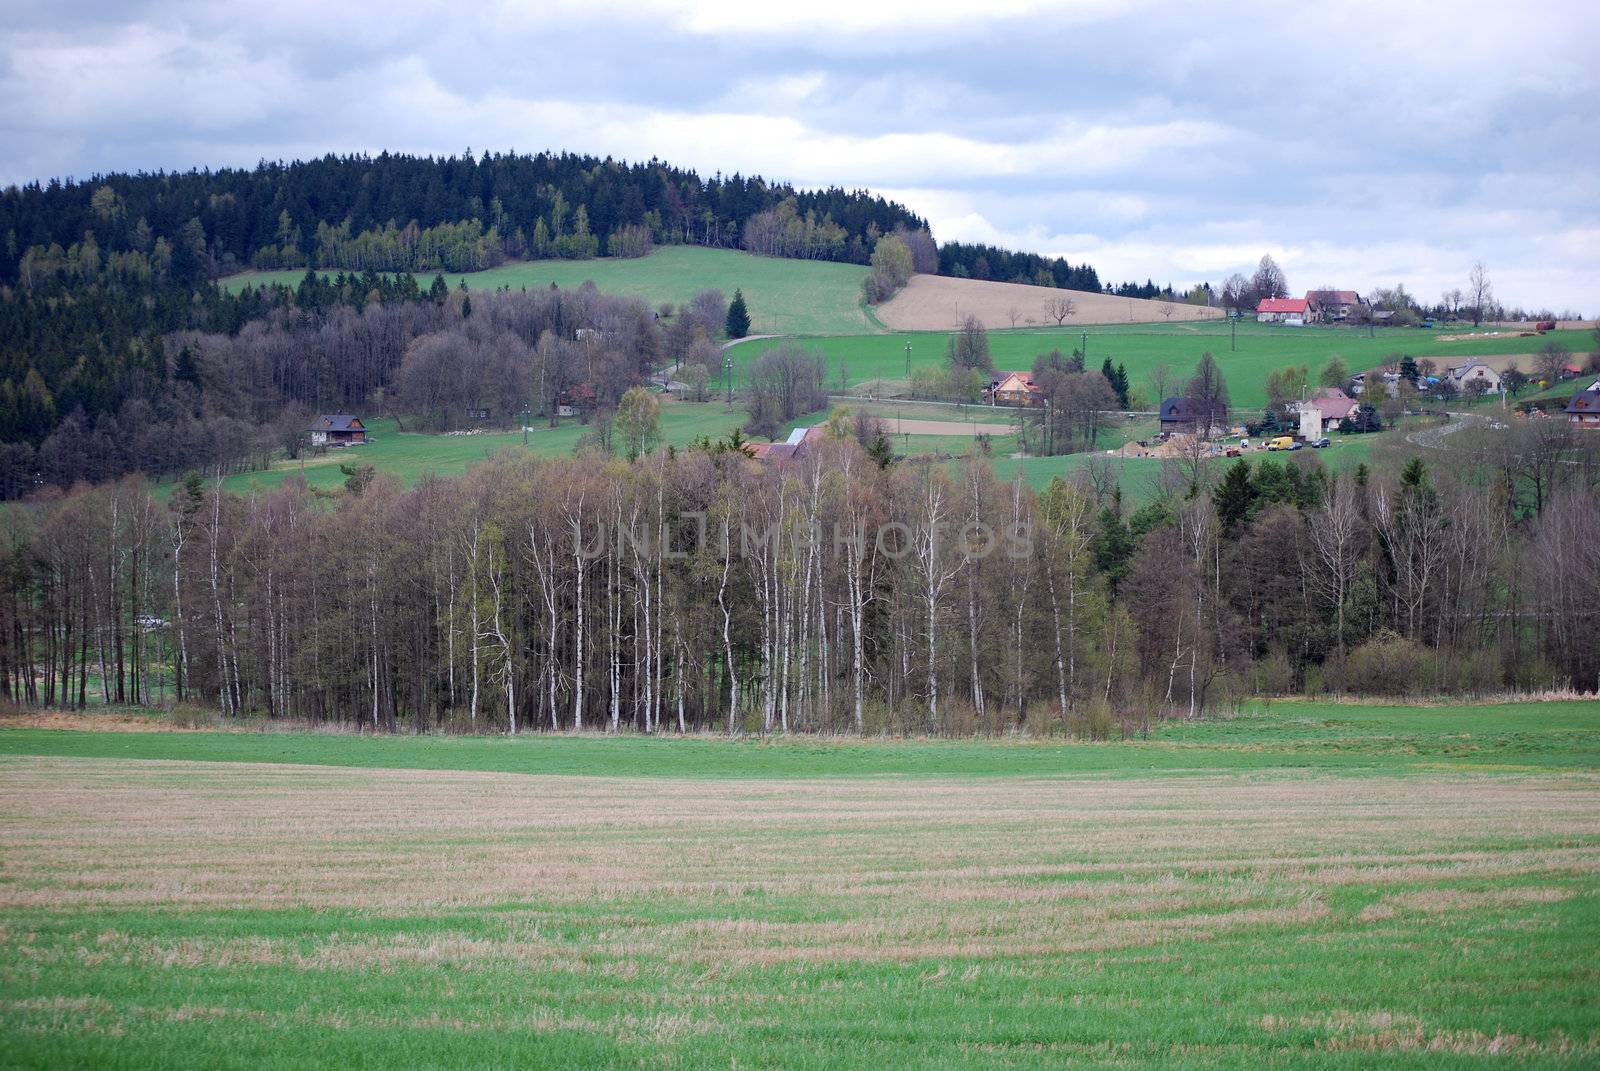 a picture from the czech countryside